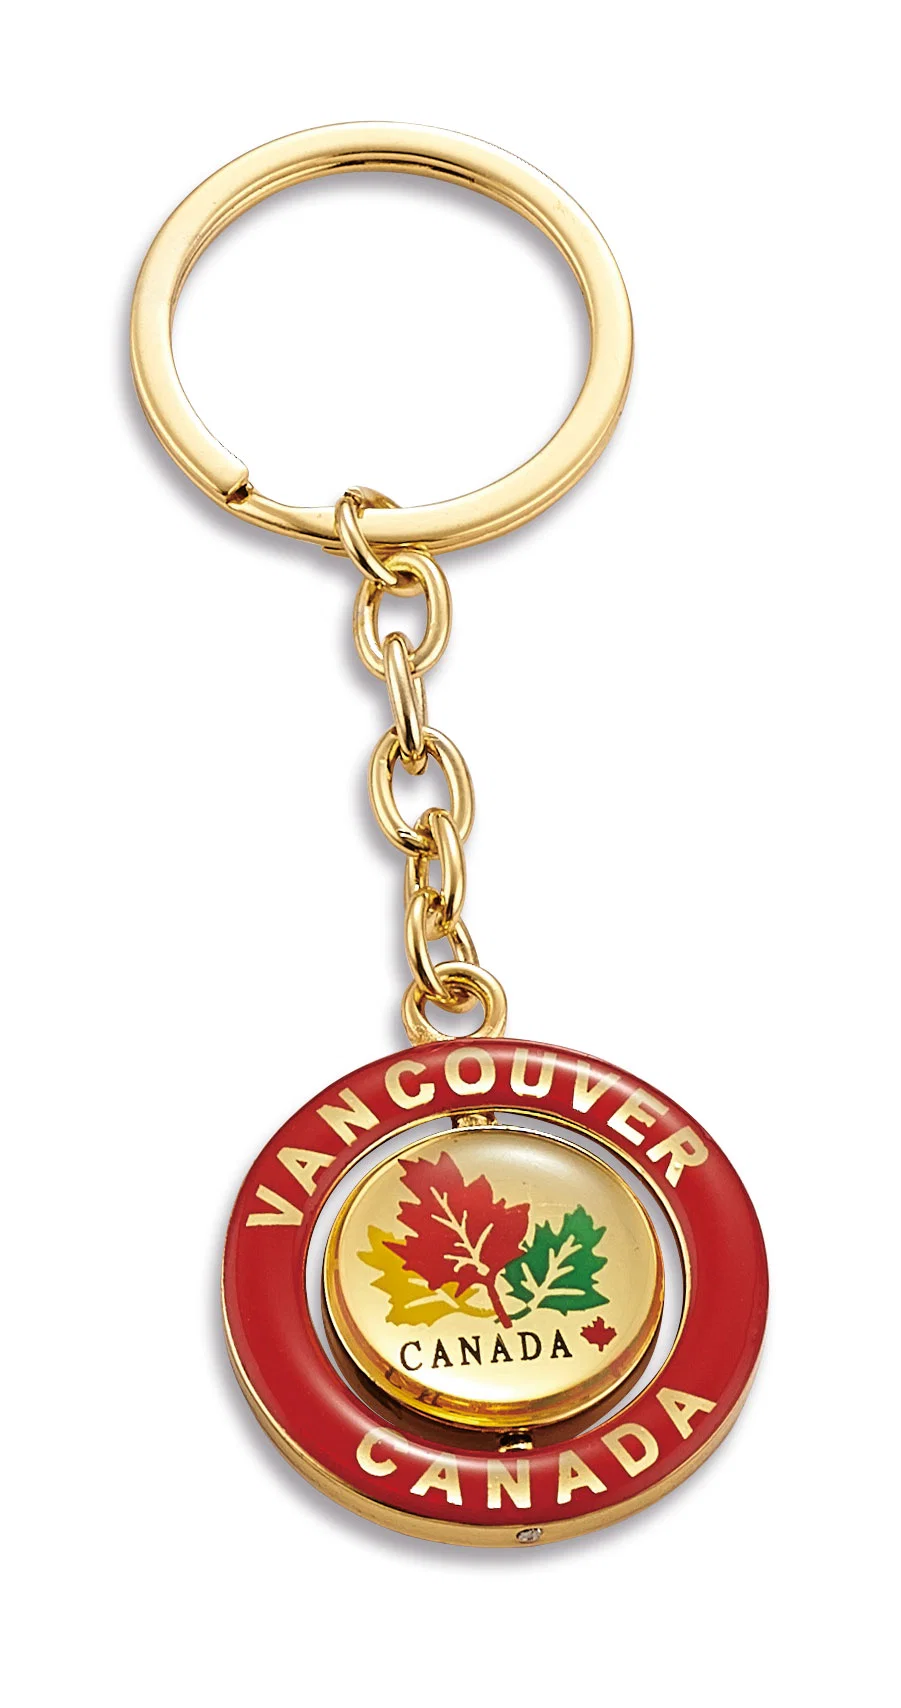 Customized Metal Key Chain, Acrylic Key Chain Customized Gifts for Souvenir/Promotional Items